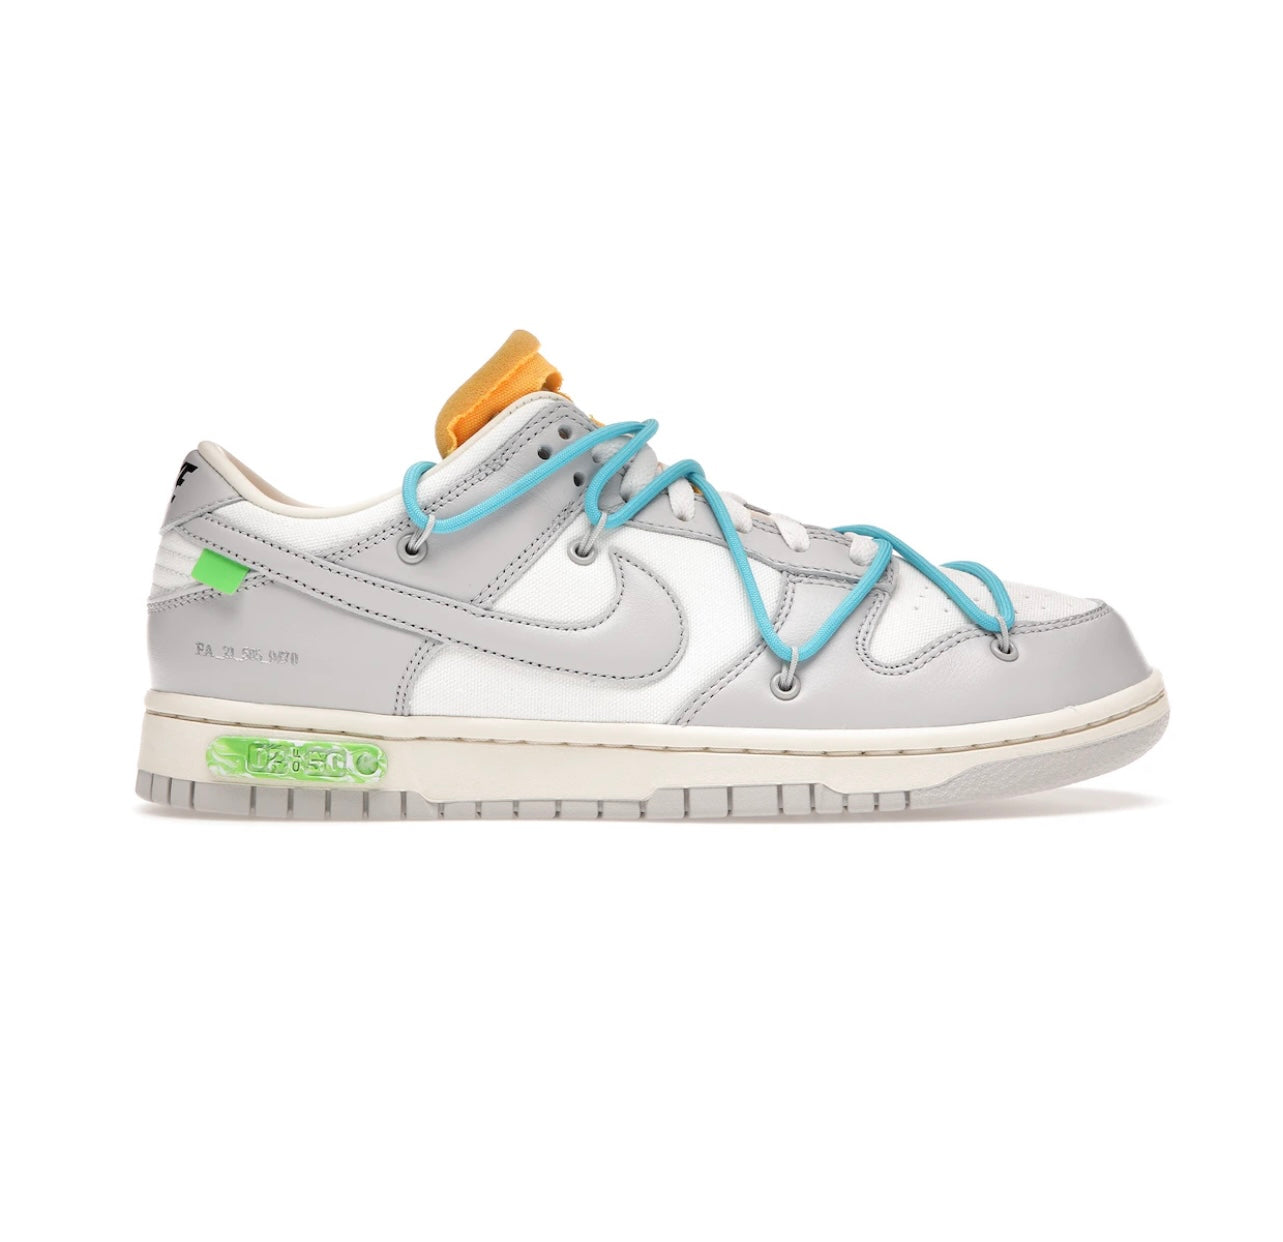 Nike Dunk Low Off-White Lot 02